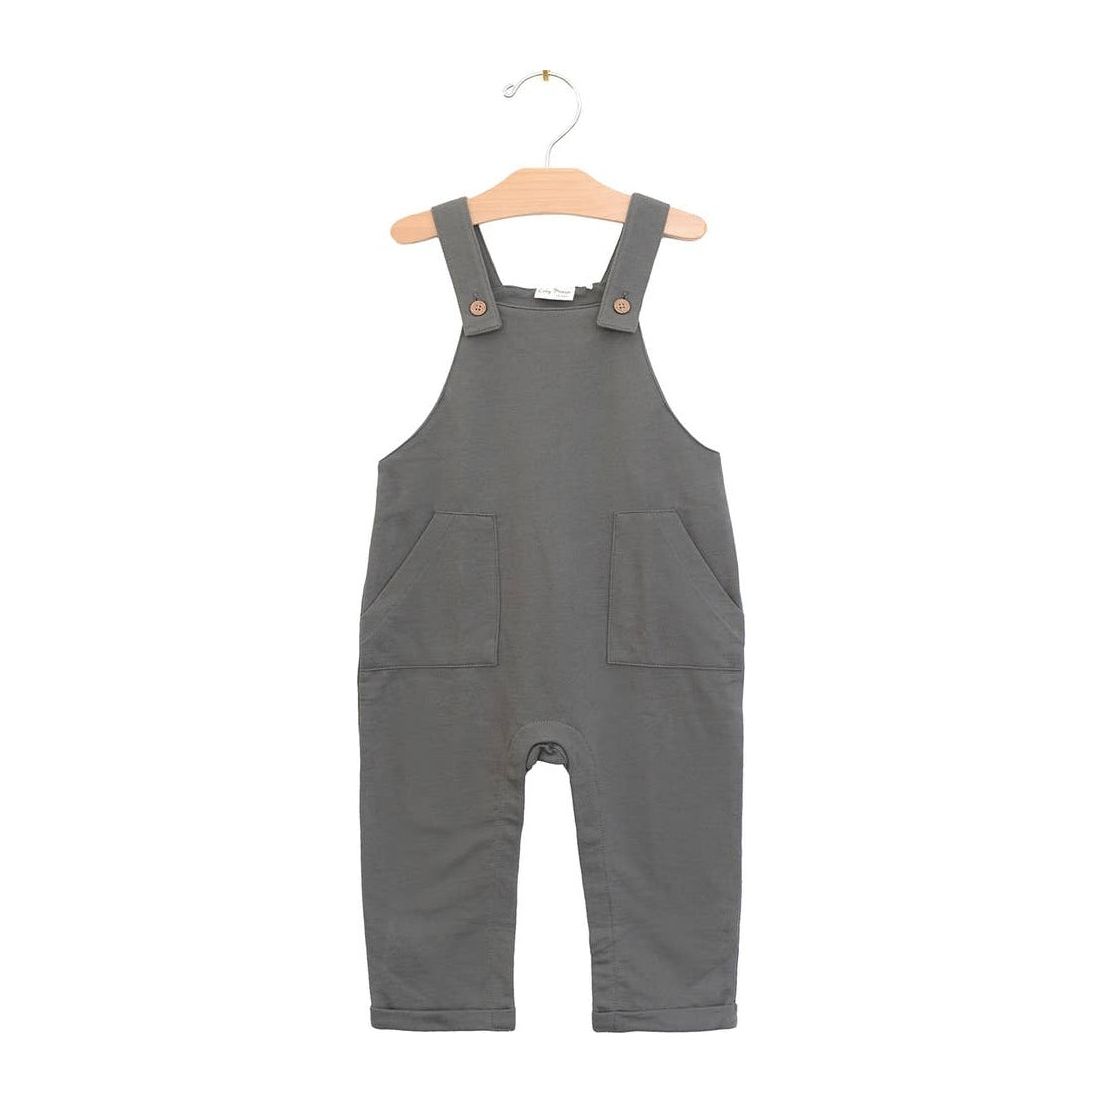 Pocket Overall - Pewter, 9-12m